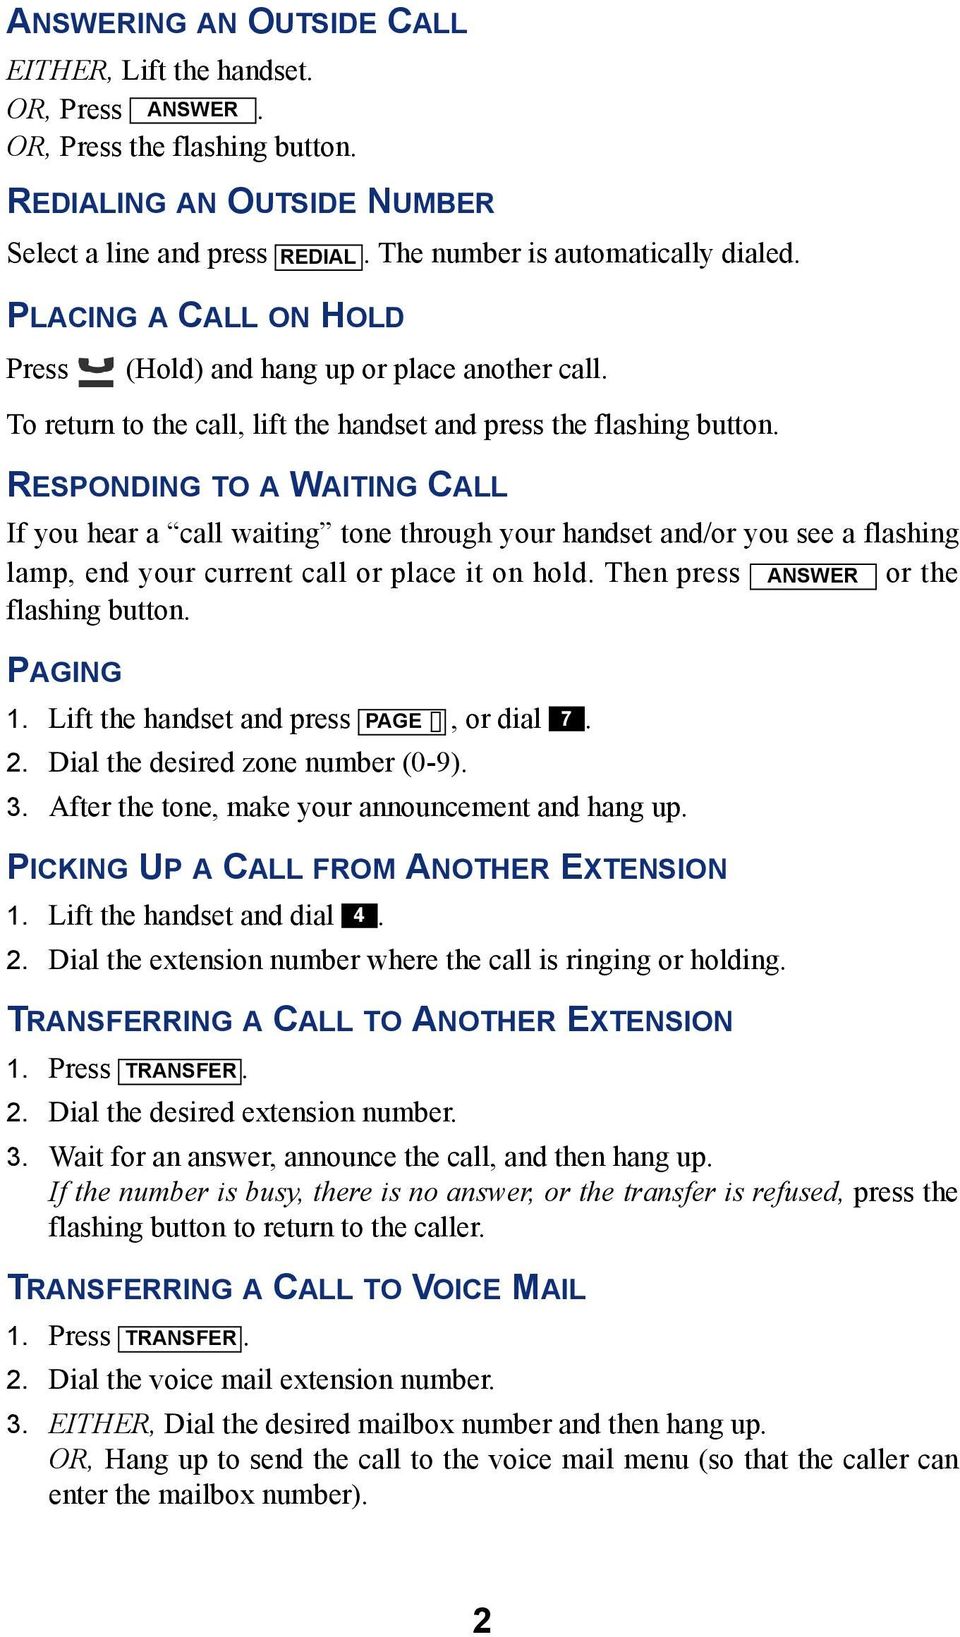 RESPONDING TO A WAITING CALL If you hear a call waiting tone through your handset and/or you see a flashing lamp, end your current call or place it on hold. Then press ANSWER or the flashing button.